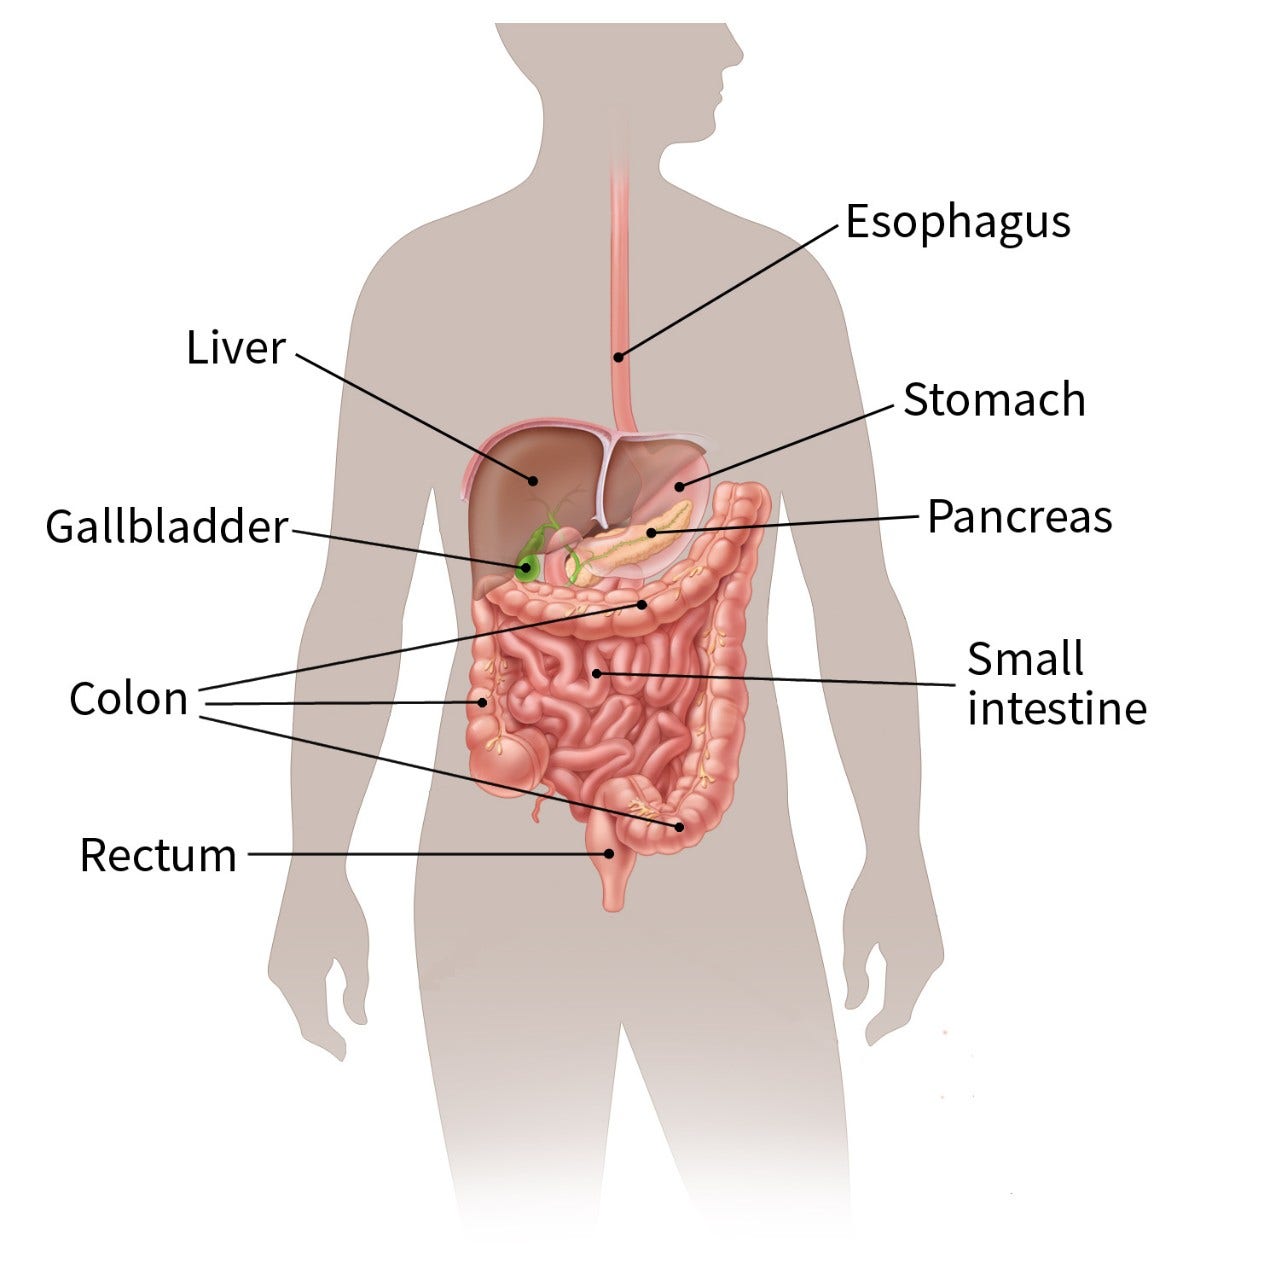 color illustration of the digestive system which shows the location of the esophagus, stomach, pancreas, rectum, colon, small intestine, gallbladder and liver